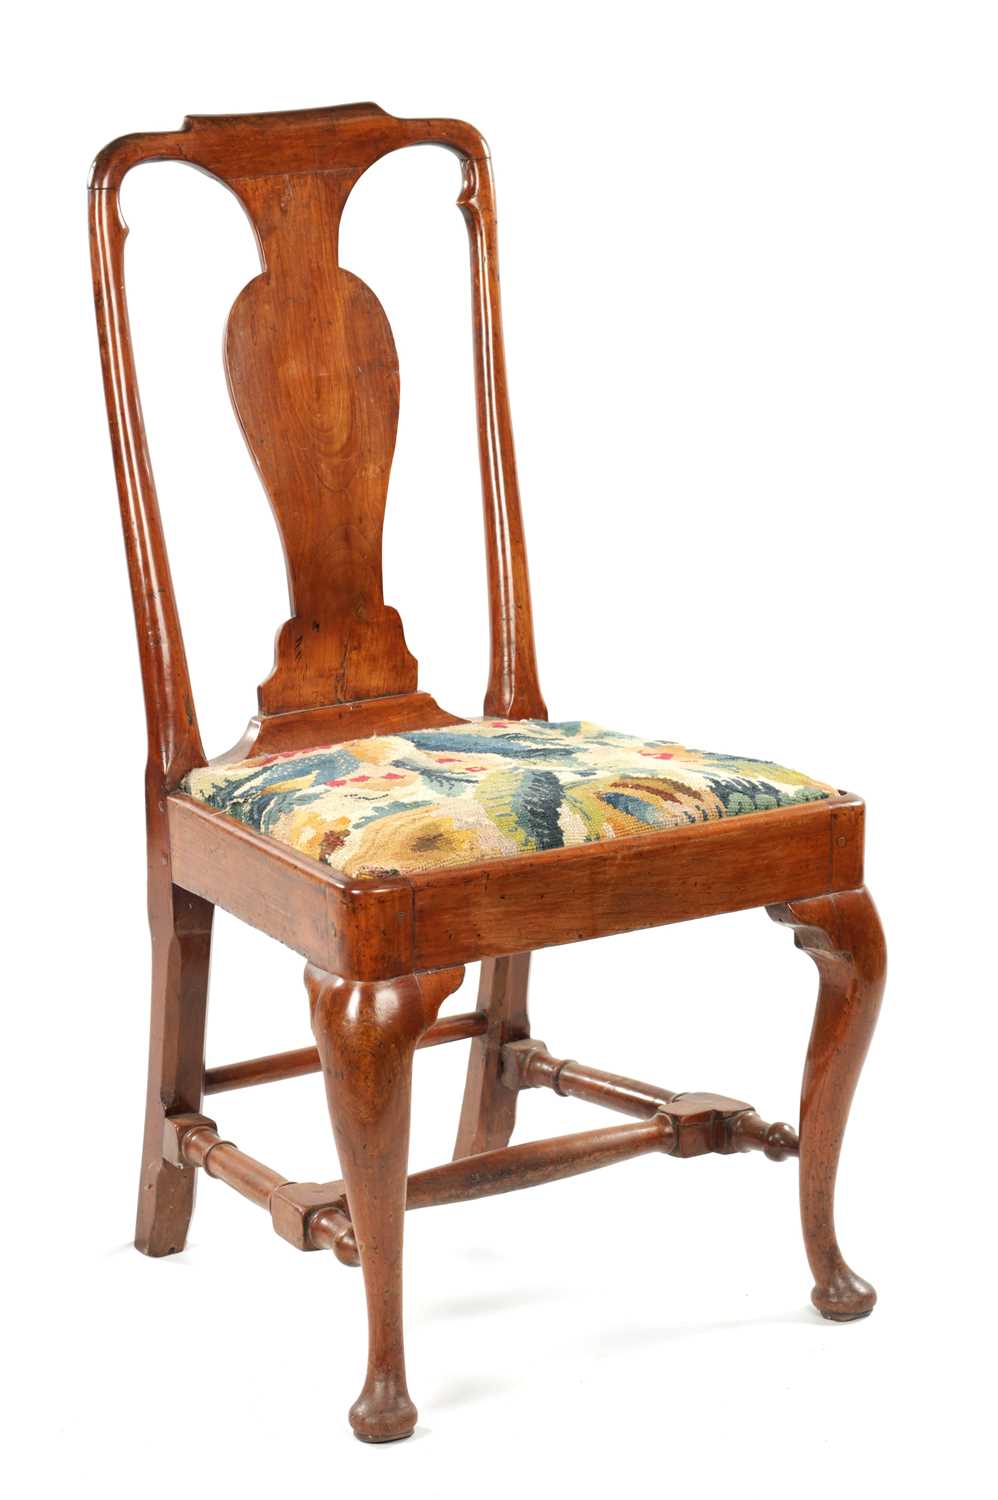 AN EARLY 18TH CENTURY FRUITWOOD SIDE CHAIR WITH PERIOD NEEDLEWORK COVERED SEAT